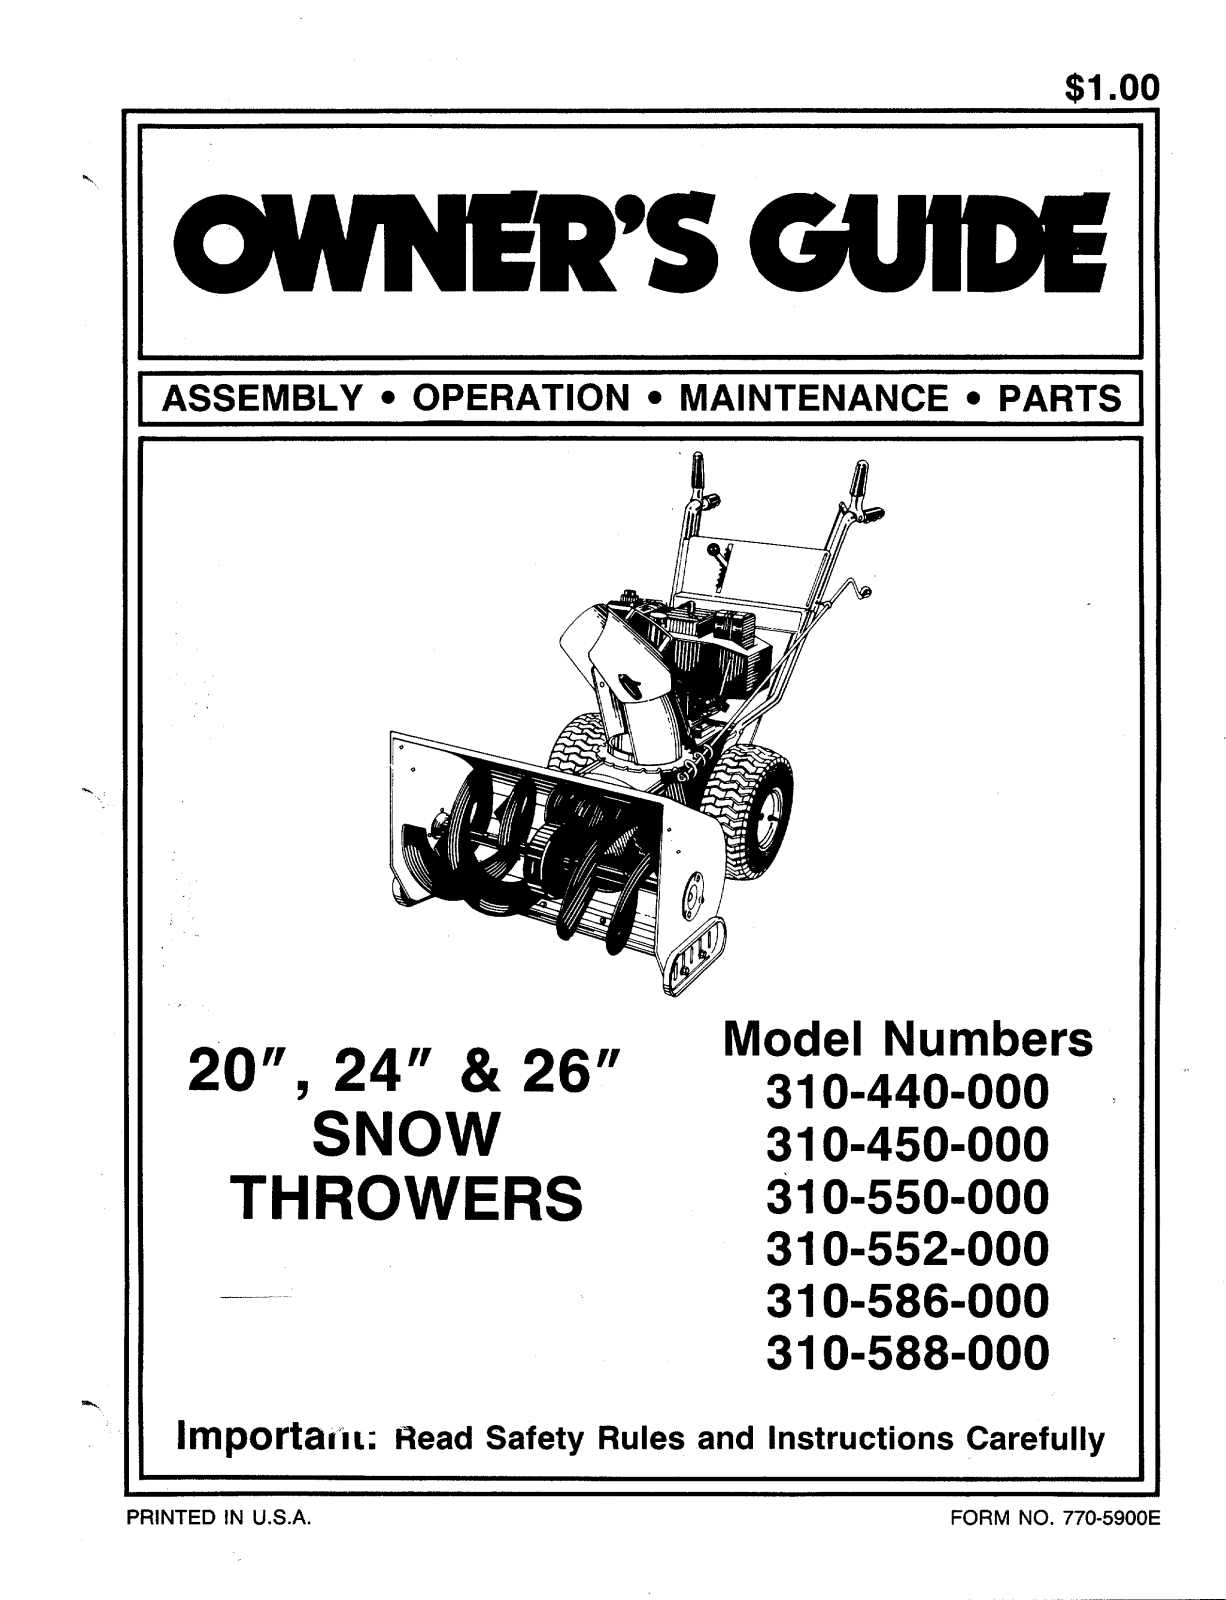 Mtd 310-440-000, 310-450-000, 310-550-000, 310-552-000, 310-586-000 owners guide